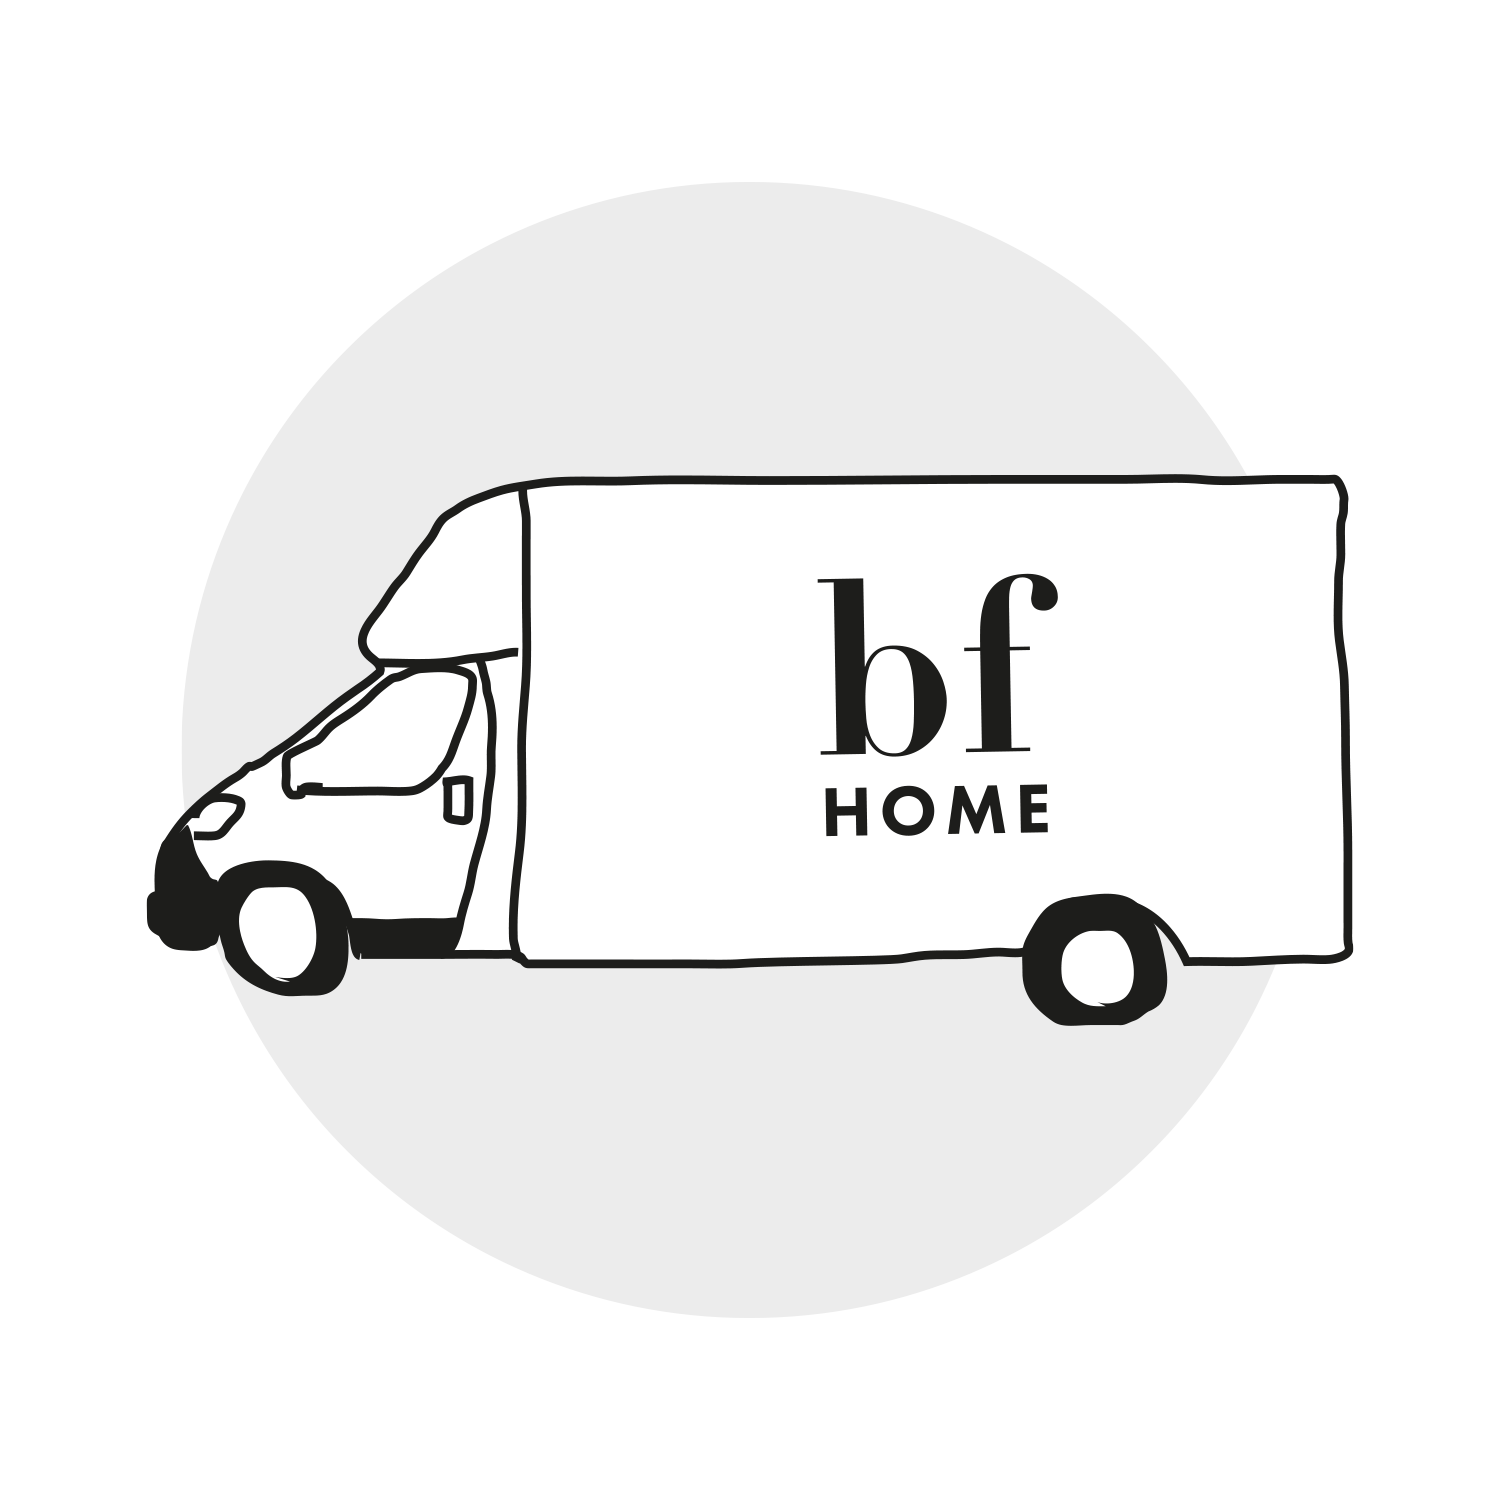 Bf Home, where You'll Find The Best Choice Of Sofas In Norwich - Well In Our Humble Opinion